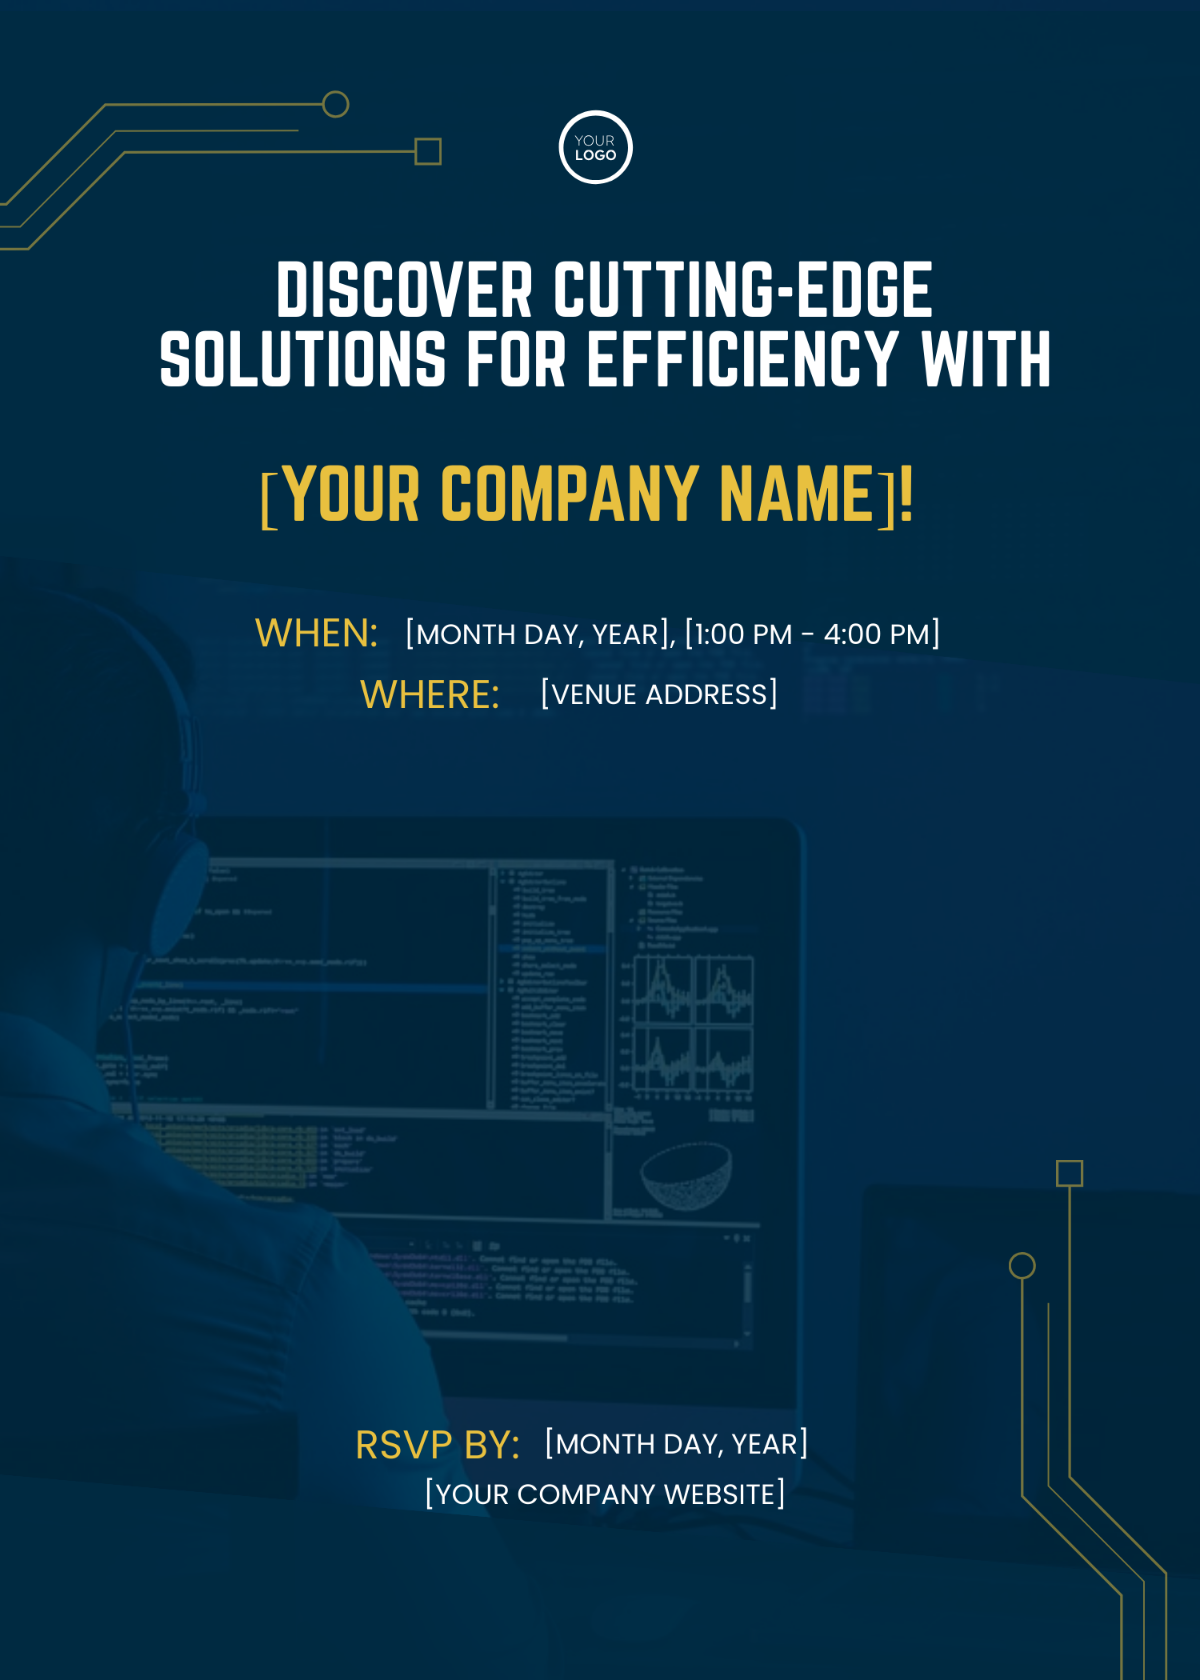 Free Administrative Technology Solutions Expo Invitation Card Template